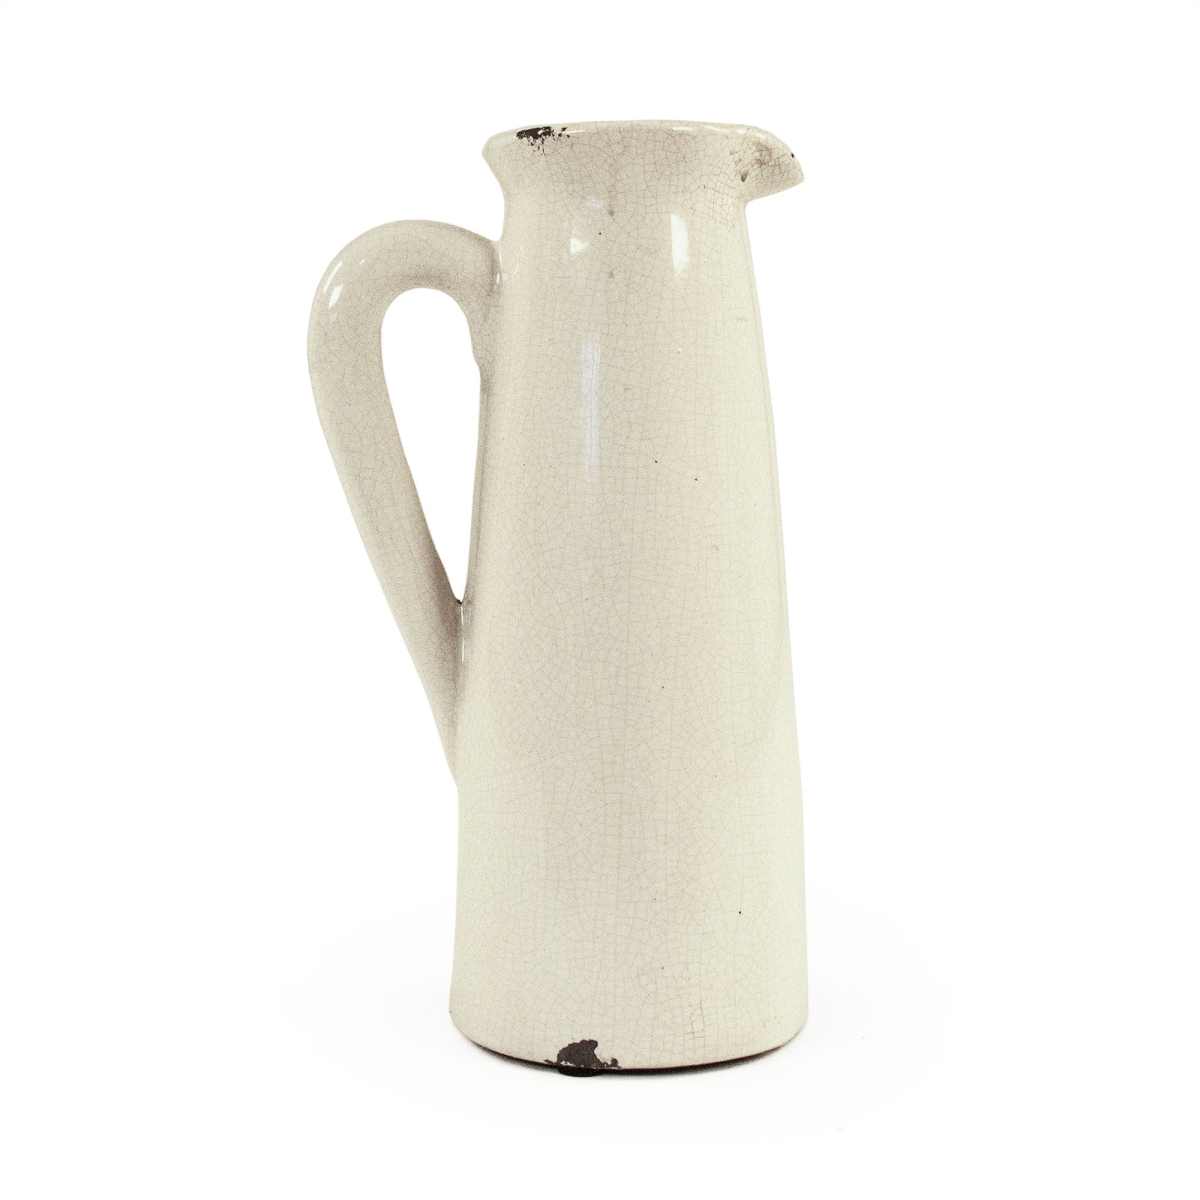 Picture of Zentique 015658 A369 Distressed Crackle White Ceramic Pitcher - Large